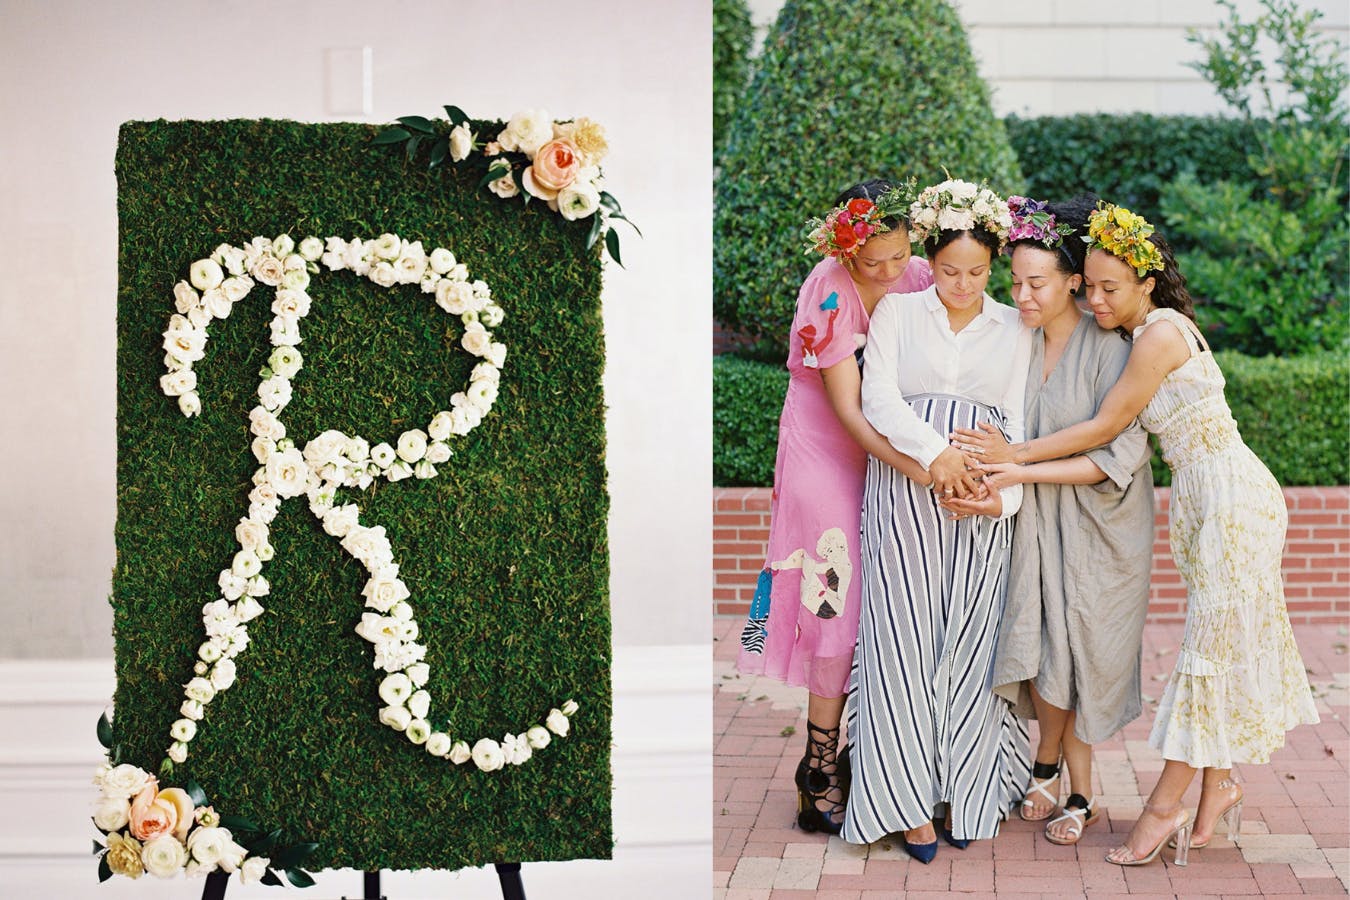 Floral-Forward Baby Shower With Four Sisters Wearing Floral Crowns | PartySlate